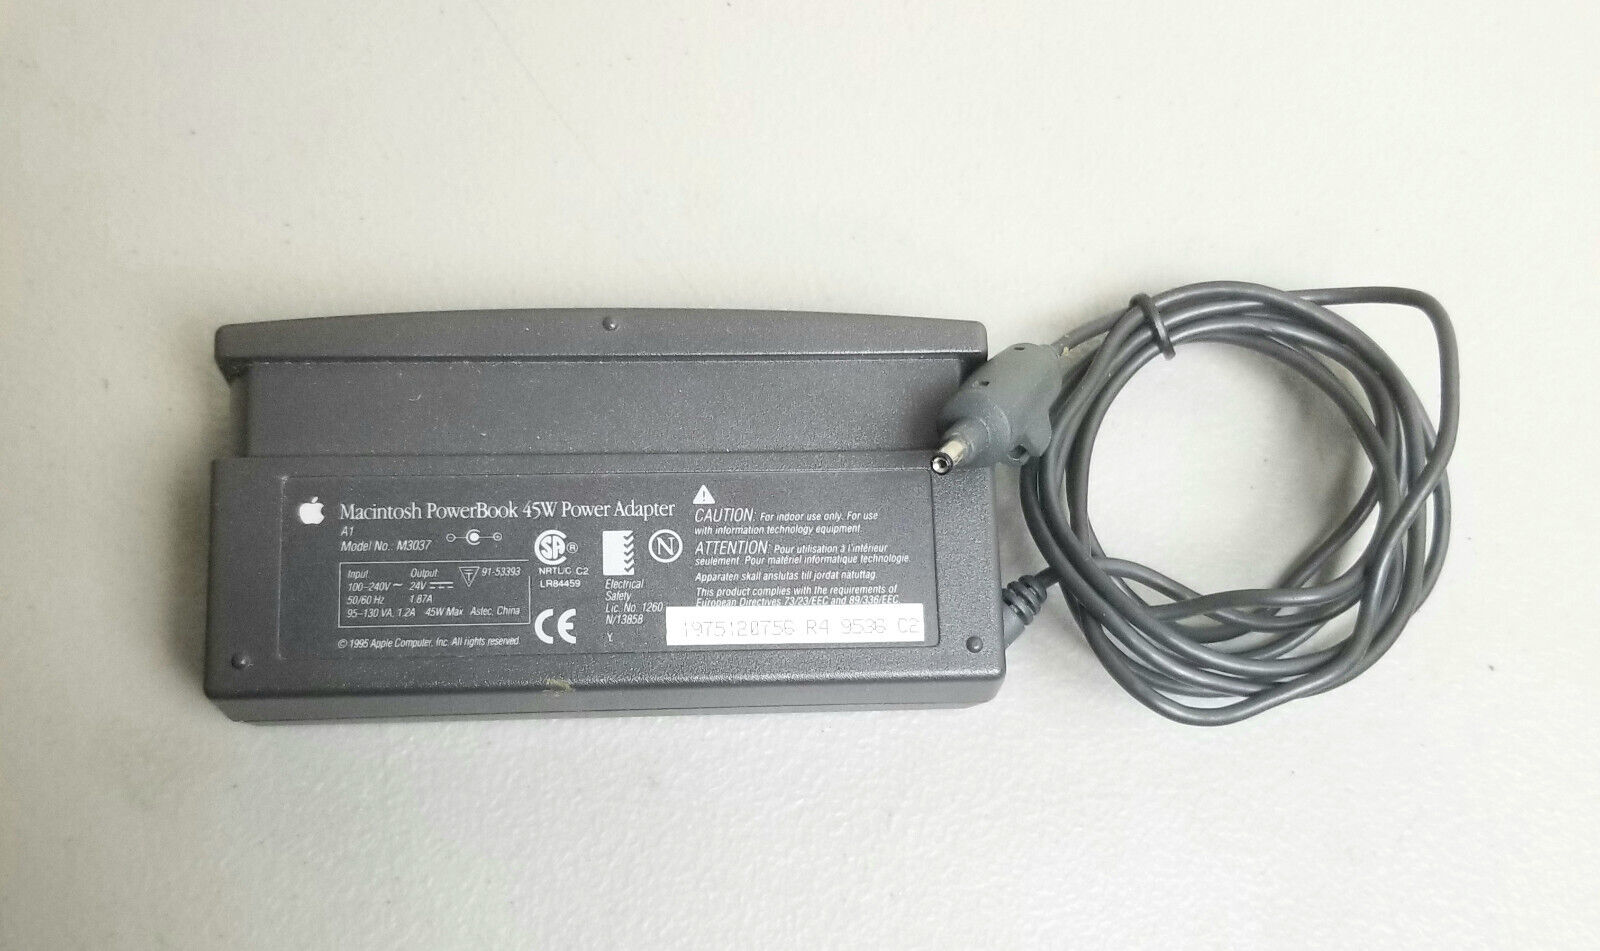 Apple M3037 Power Supply Charger for vintage PowerBook - 24v 45W